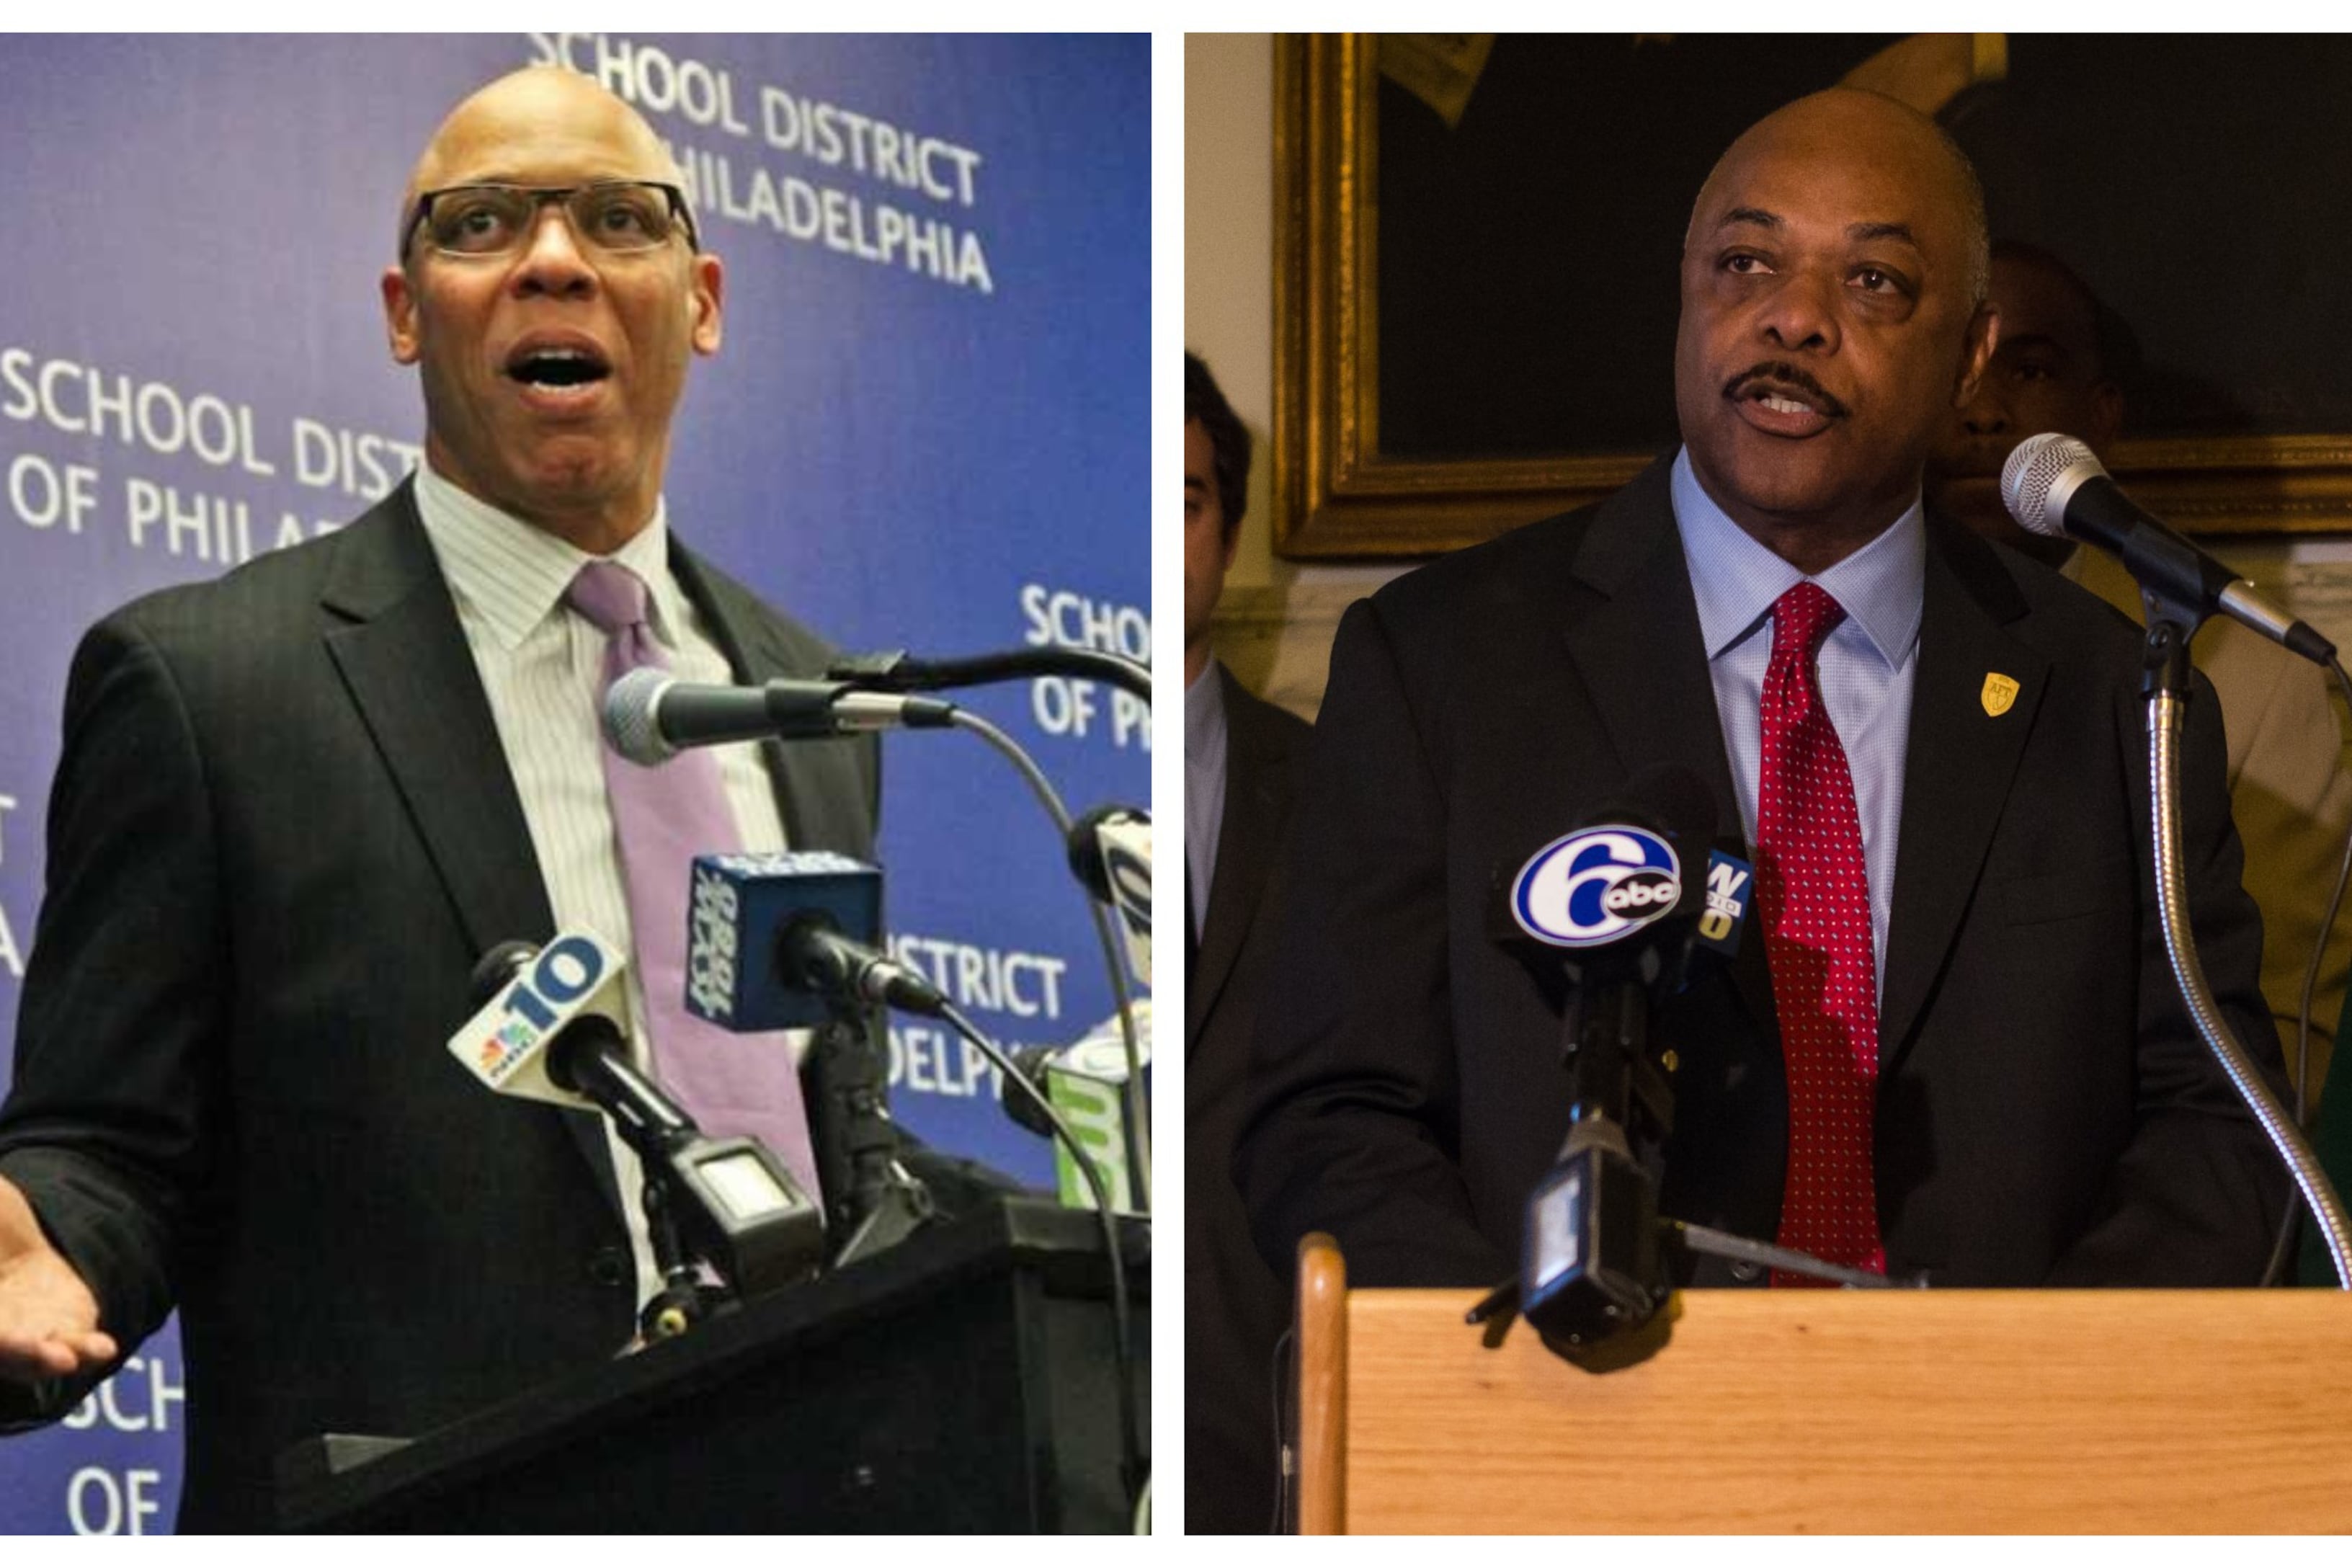 Split image of William Hite speaking at a microphone on the left and Jerry Jordan speaking at a microphone on the right.